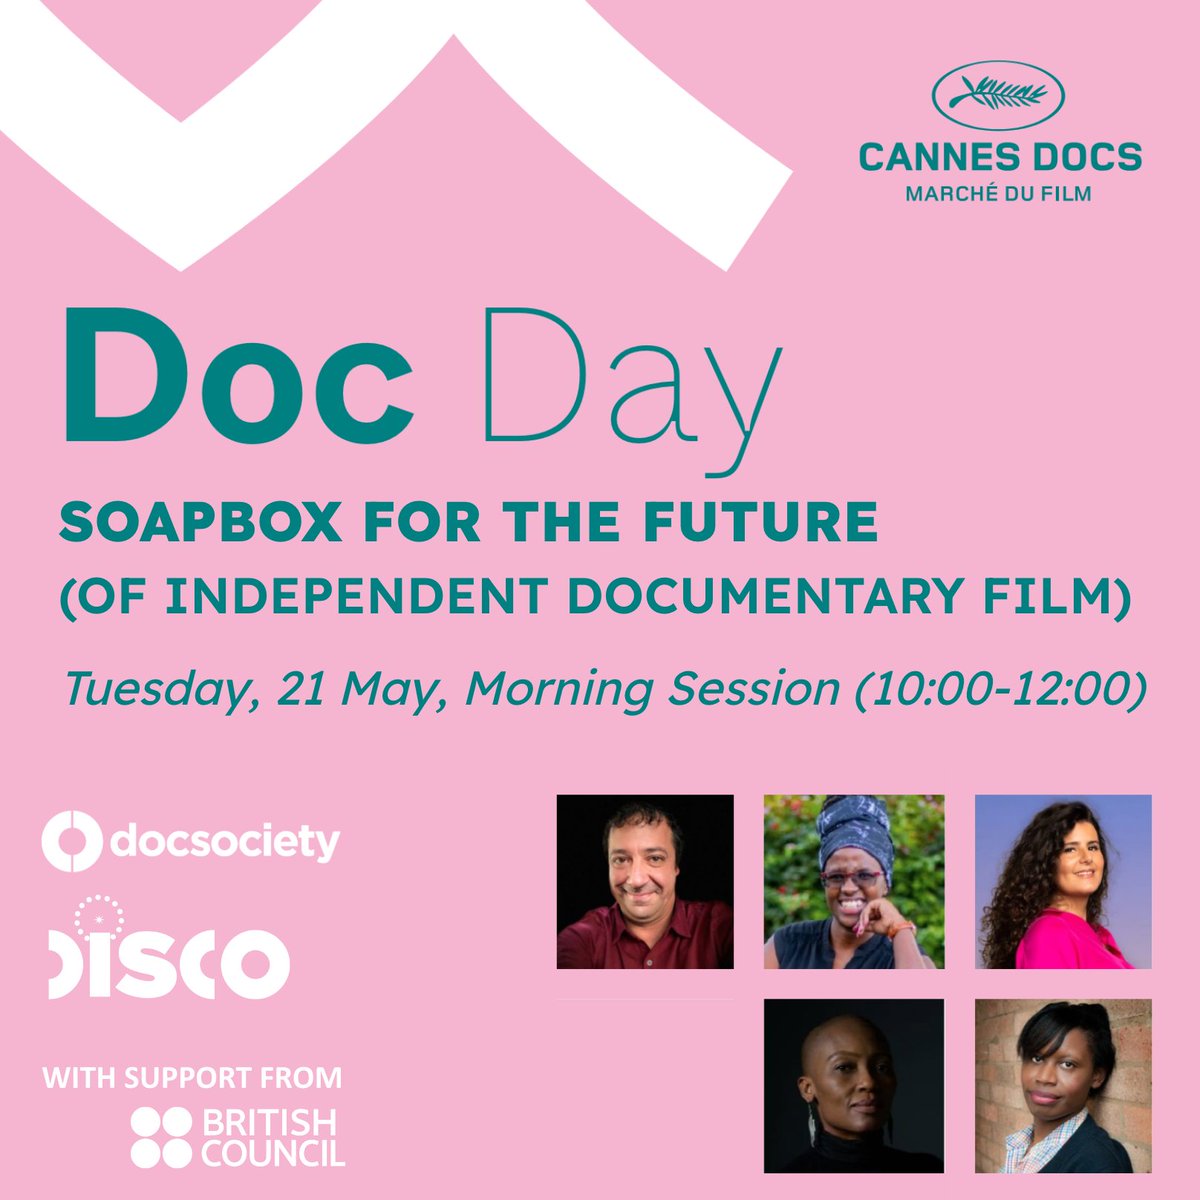 Join us at Cannes on Tuesday 21 May for #CannesDocs morning session (10:00-12:00), where we will be hosting the ✨Soapbox for the Future (of Independent Documentary Film)!✨ With special keynotes from @DocsMX @DOCUBOXFilmFund @EncountersDoc #NewDawnFund & more See you there!👋